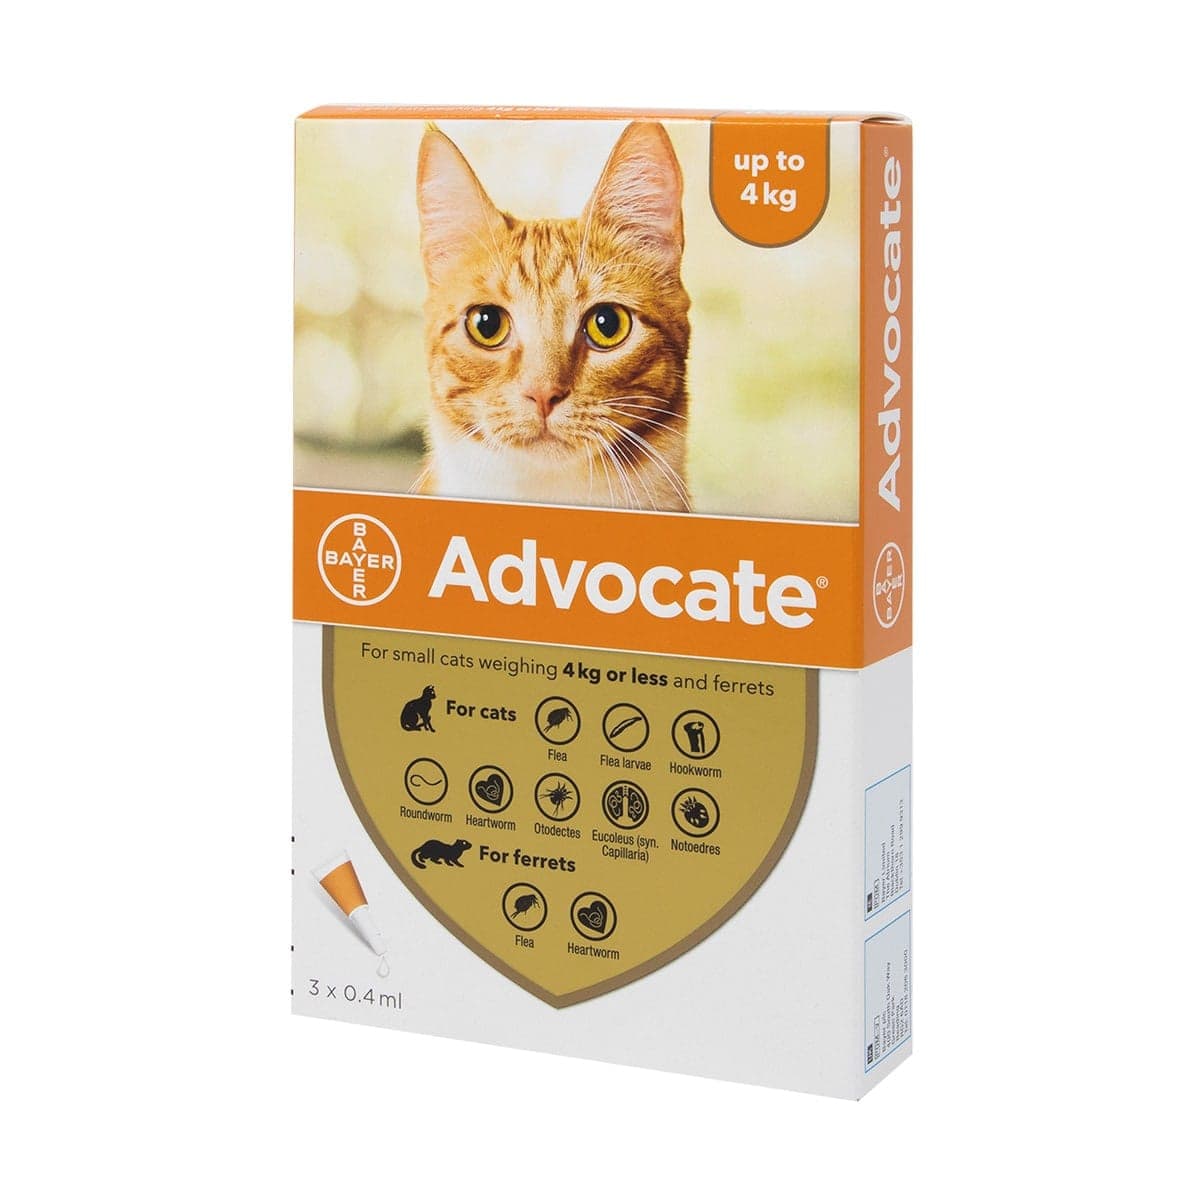 Advocate for cats between 1KG - 4KG